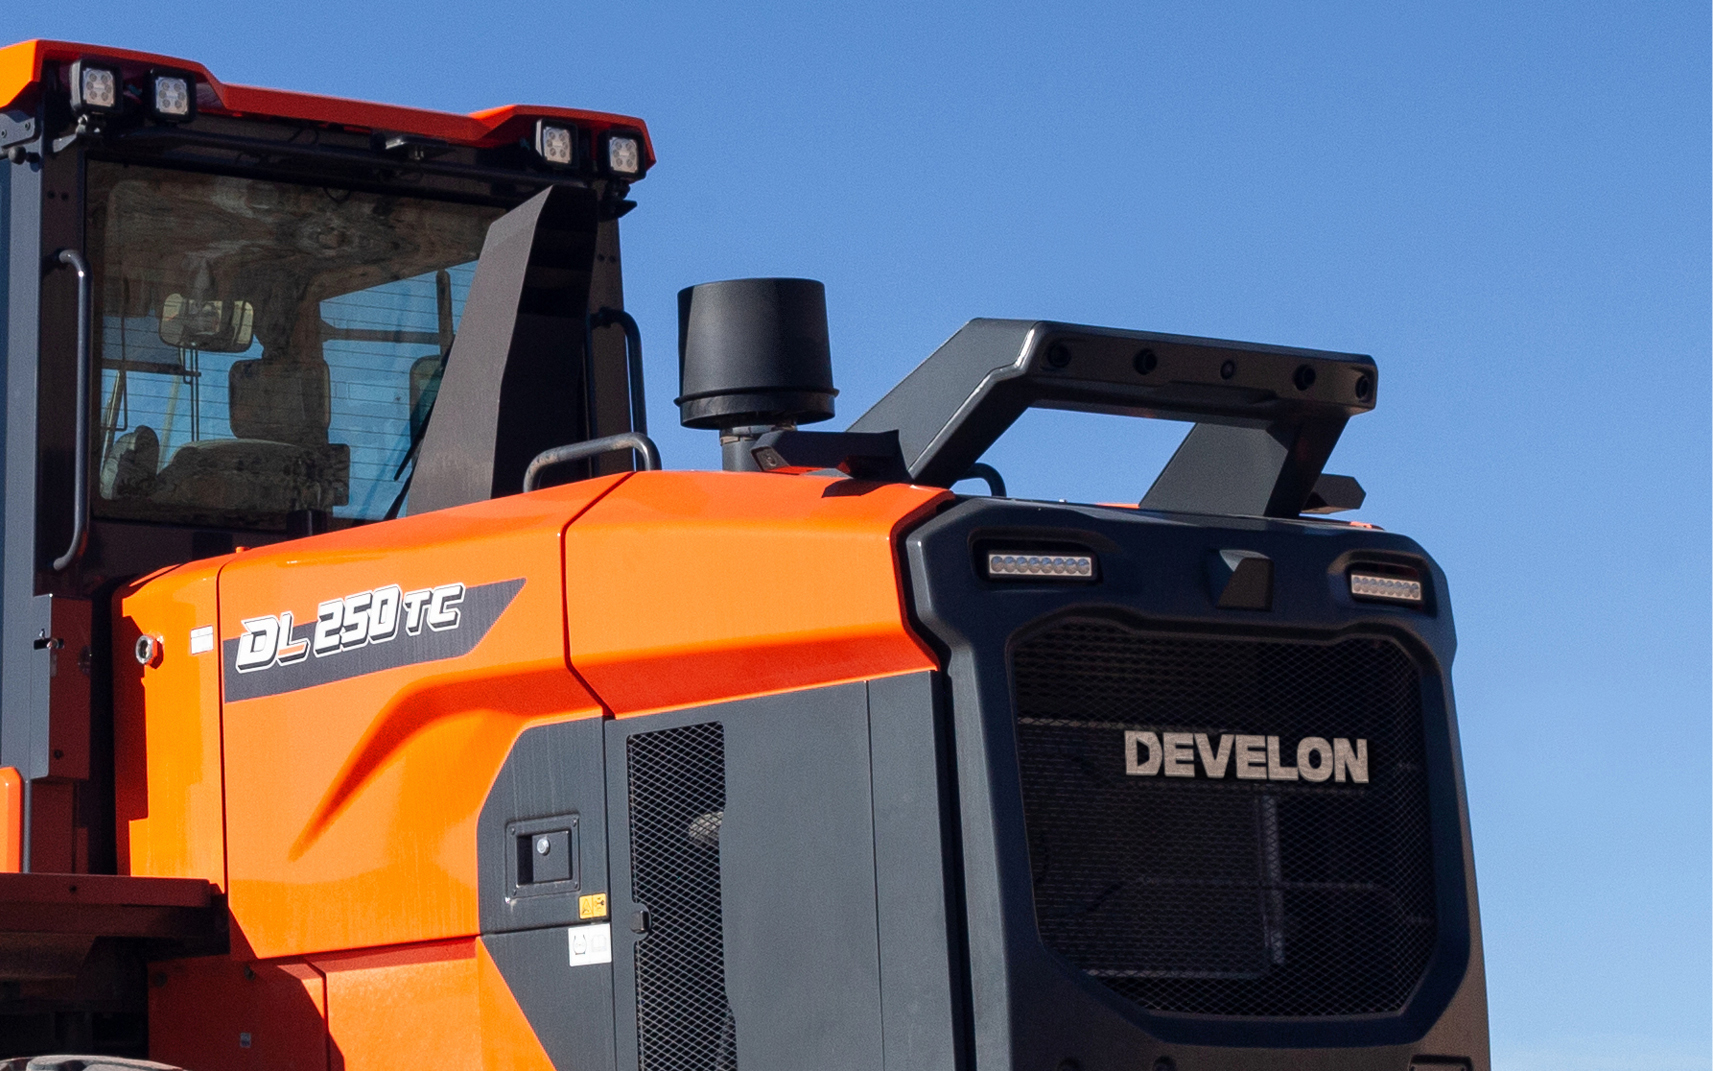 The DEVELON DL250TC-7 wheel loader has the optional object detection system installed on it.